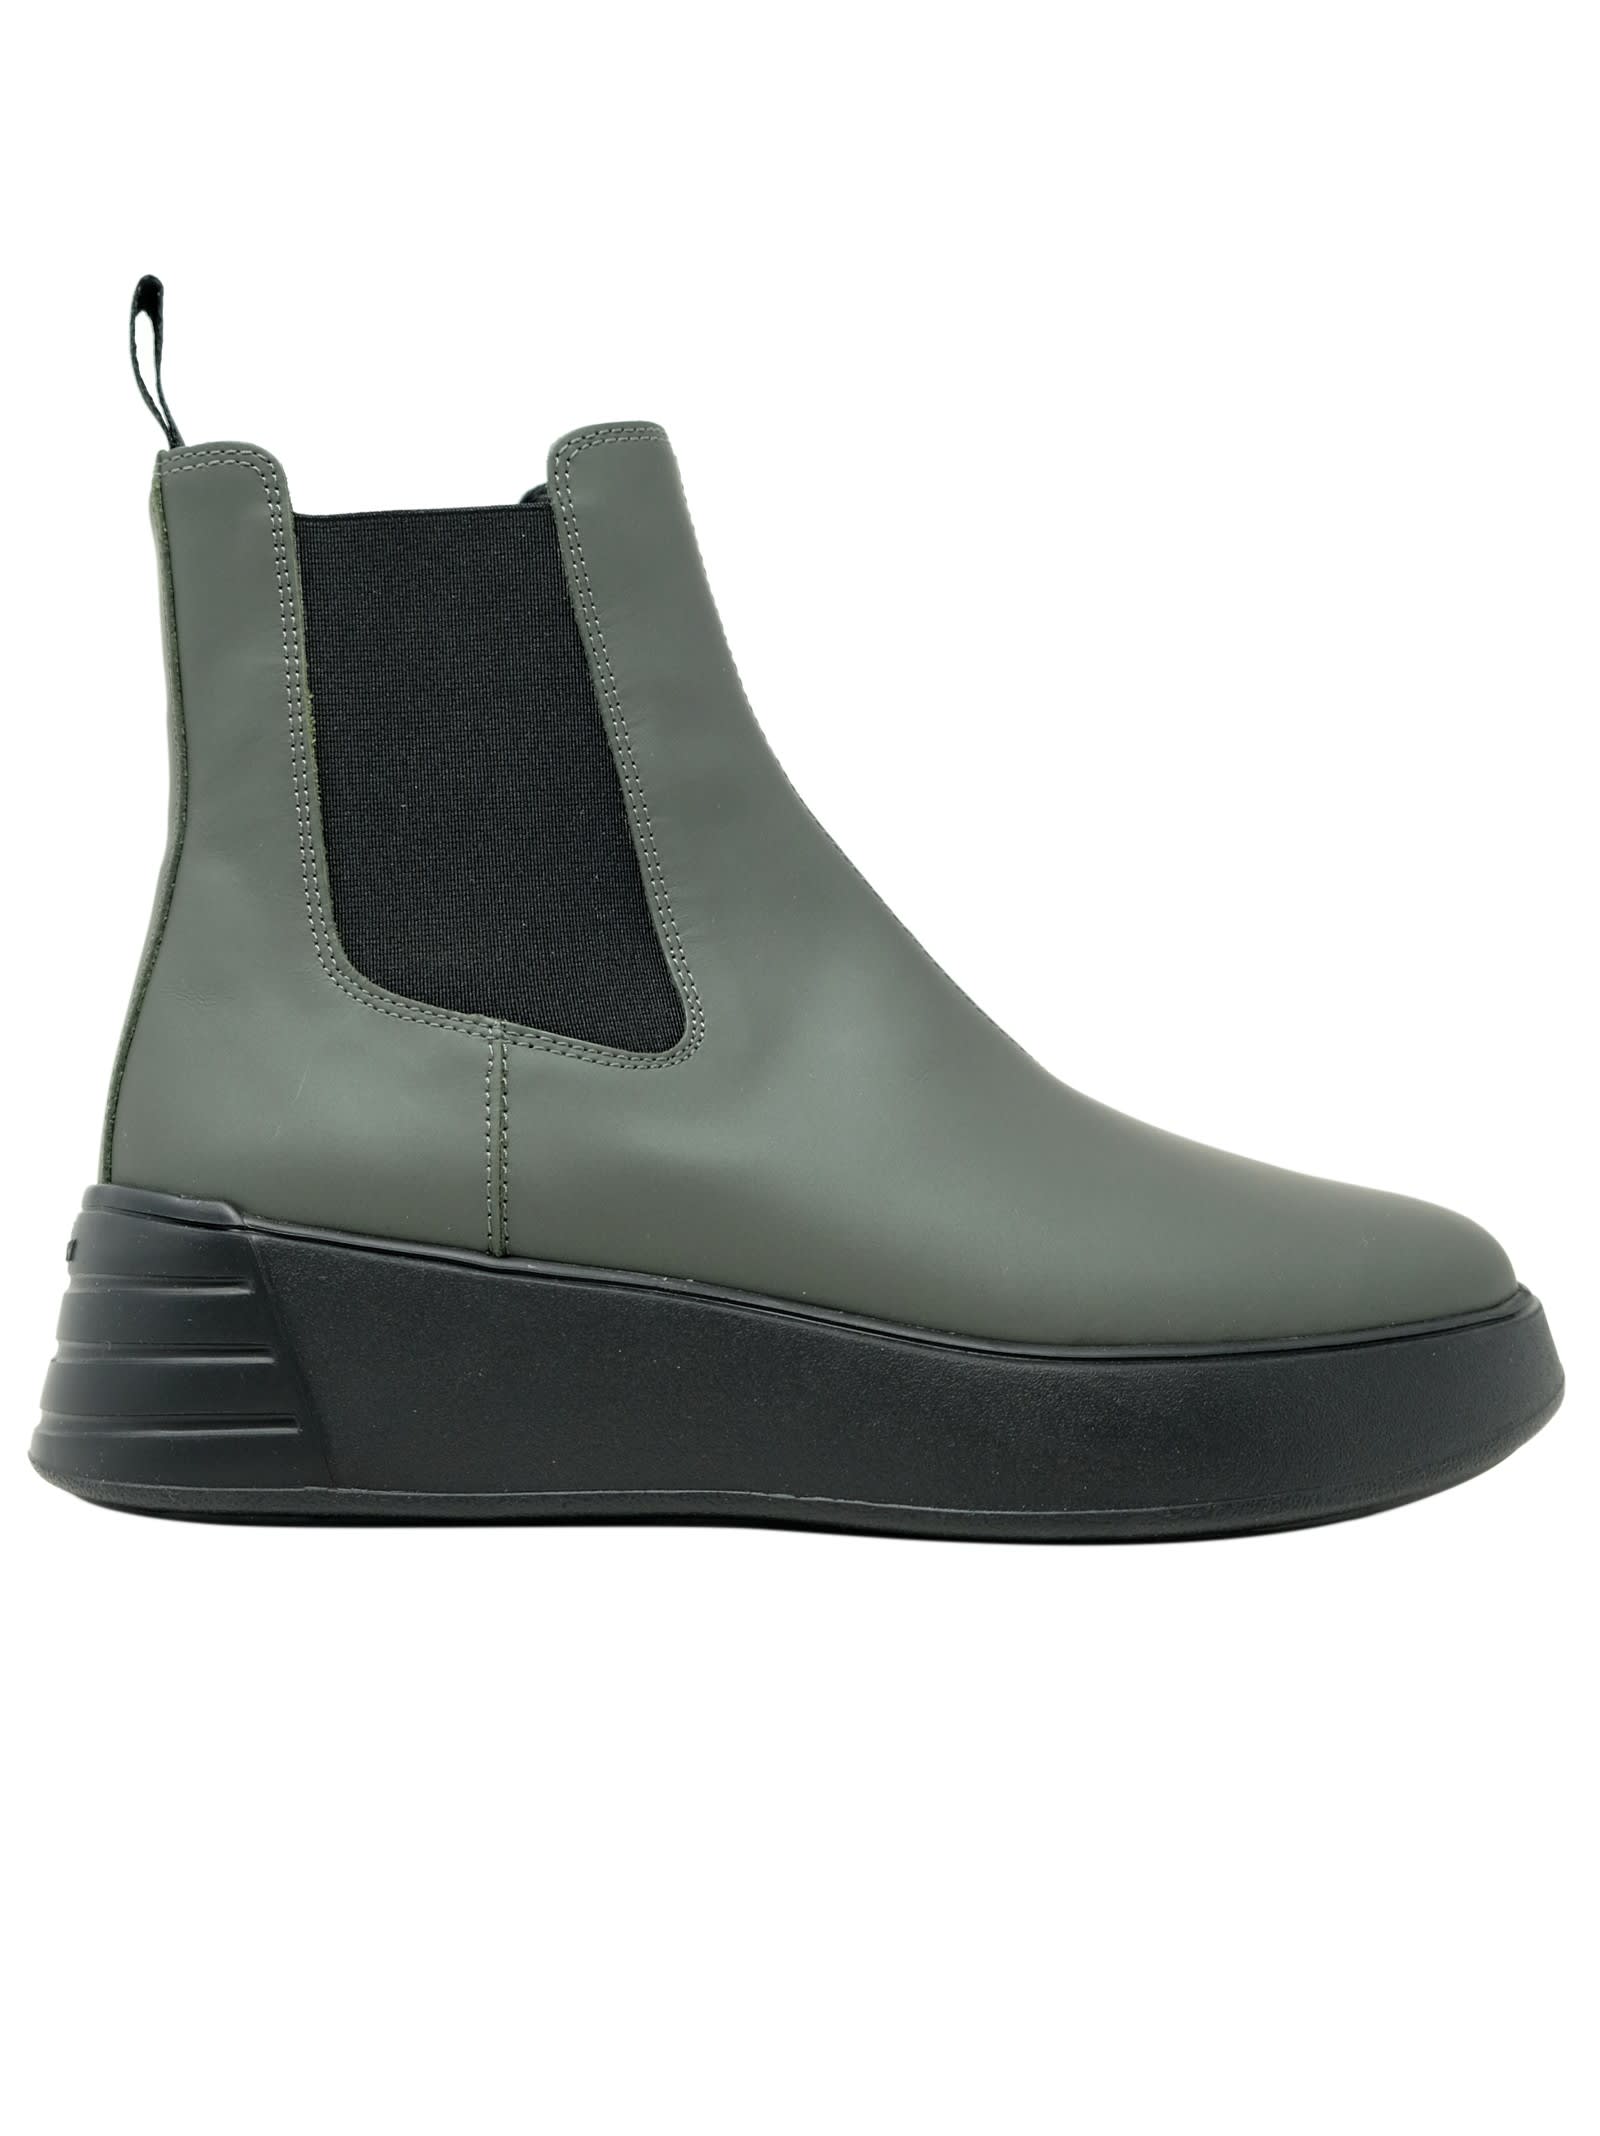 Hogan Military Green Leather Ankle Boots